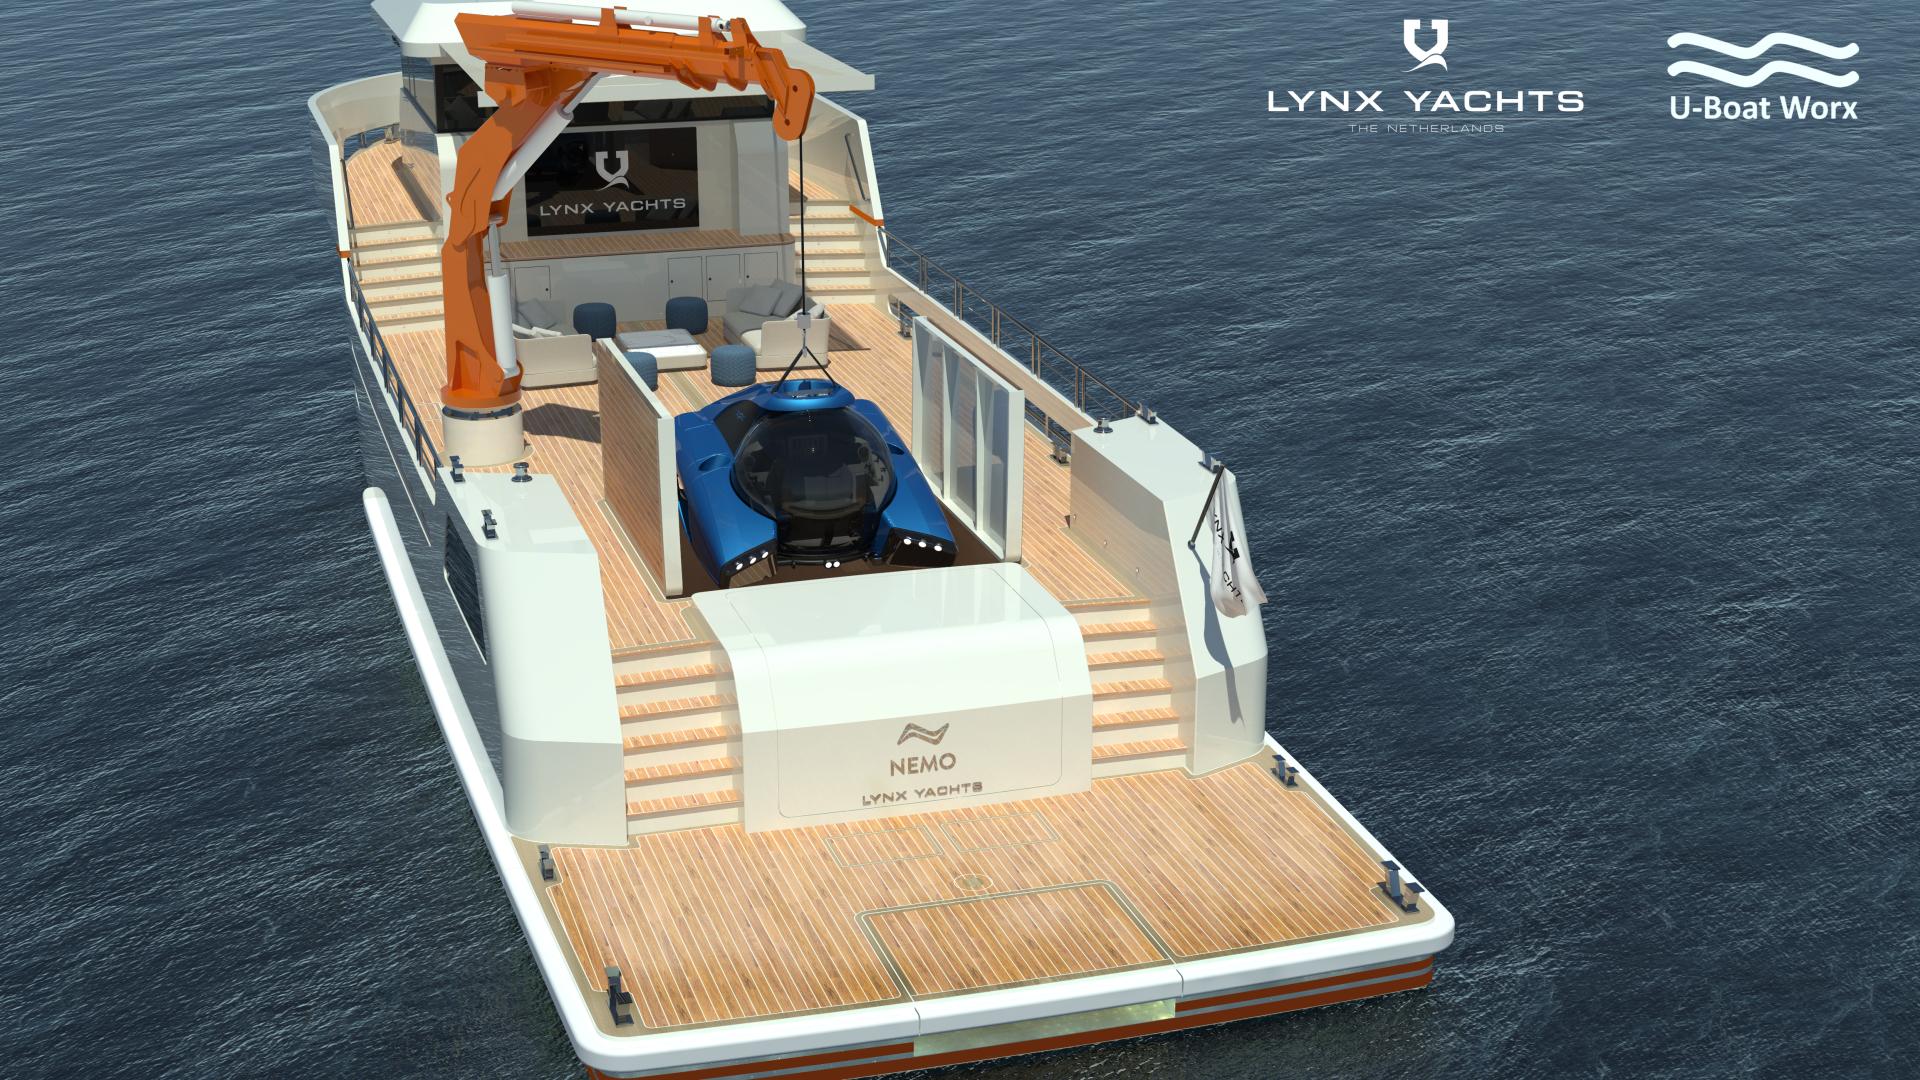 Lynx Yachts announces the cooperation with U-Boat Worx 